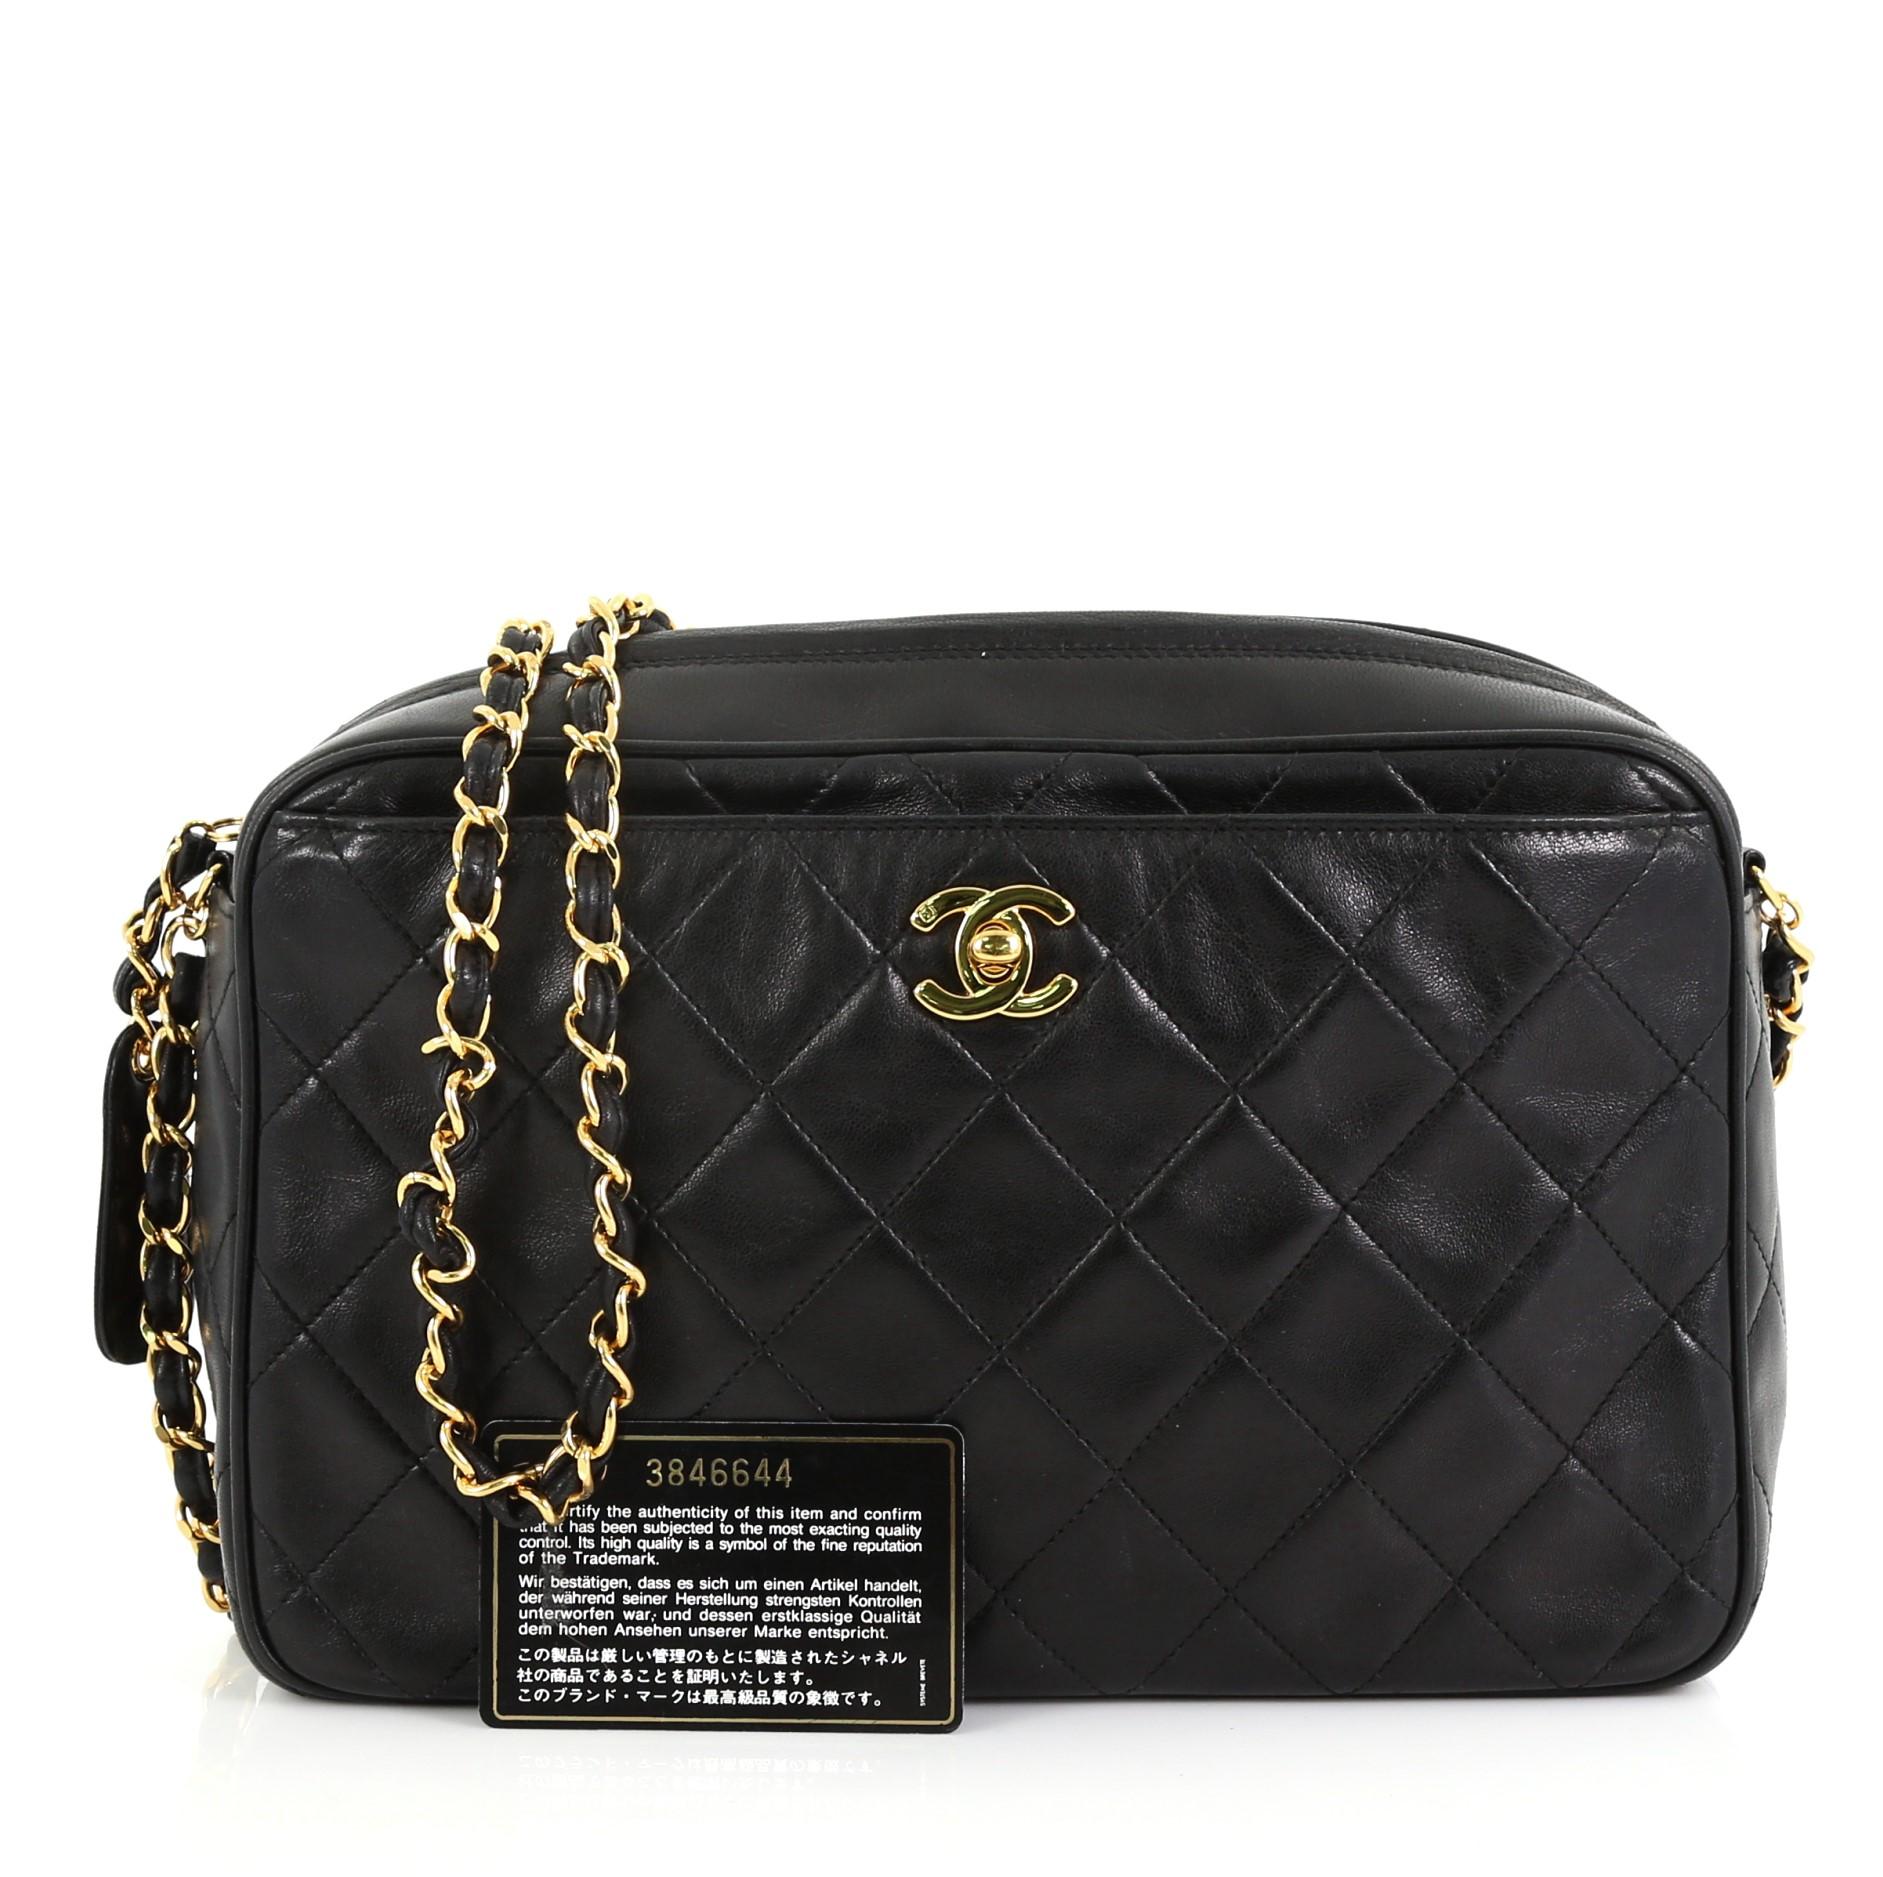 This Chanel Vintage Front Pocket Camera Bag Quilted Leather Large, crafted in black quilted leather, features woven-in leather chain link strap, front pocket with CC turn-lock closure and gold-tone hardware. Its top zip closure opens to a black